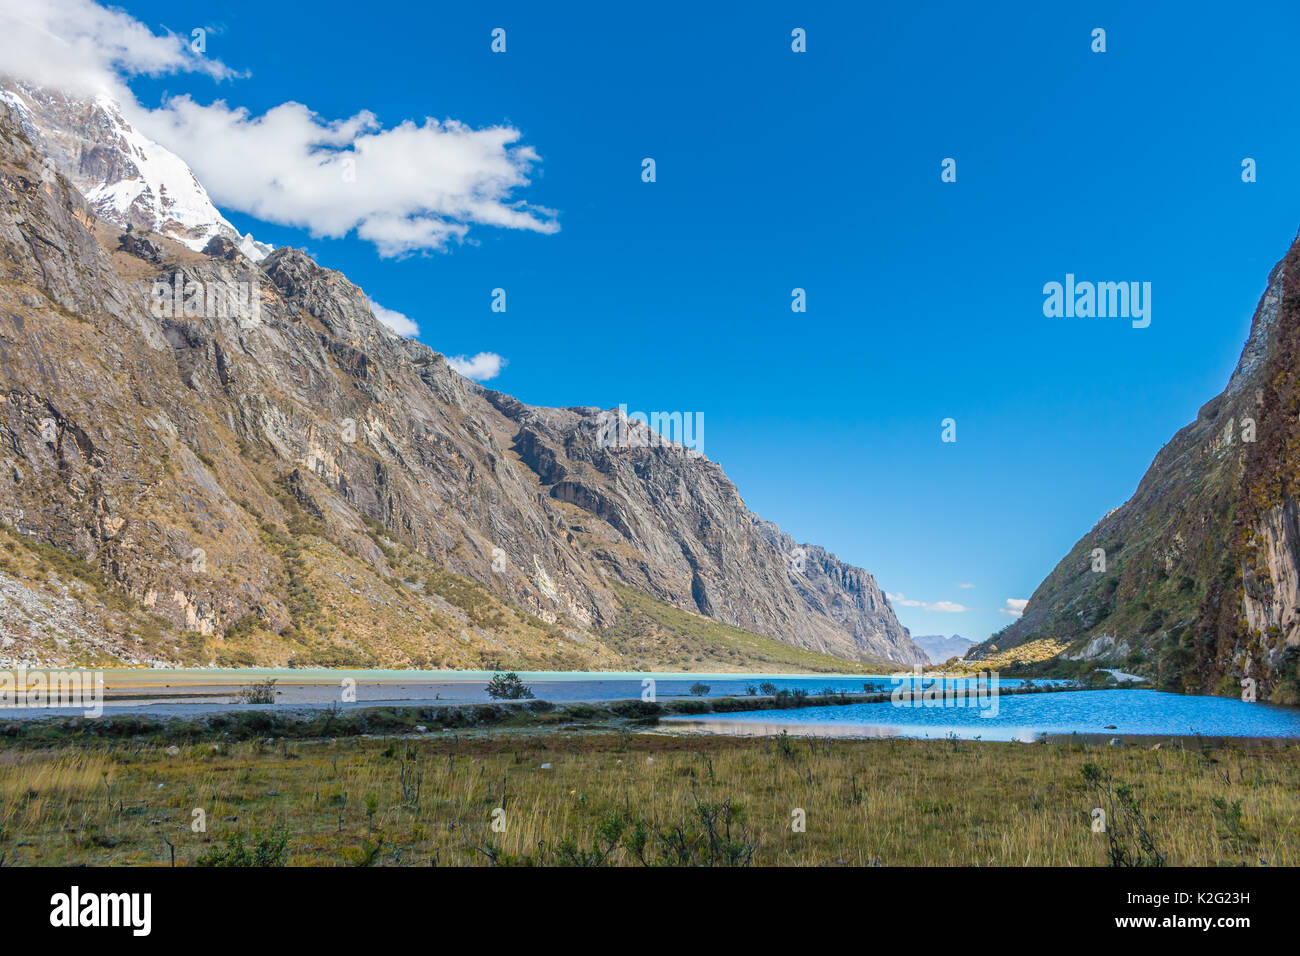 view of lake oroncocha in the andes mountains peru Stock Photo